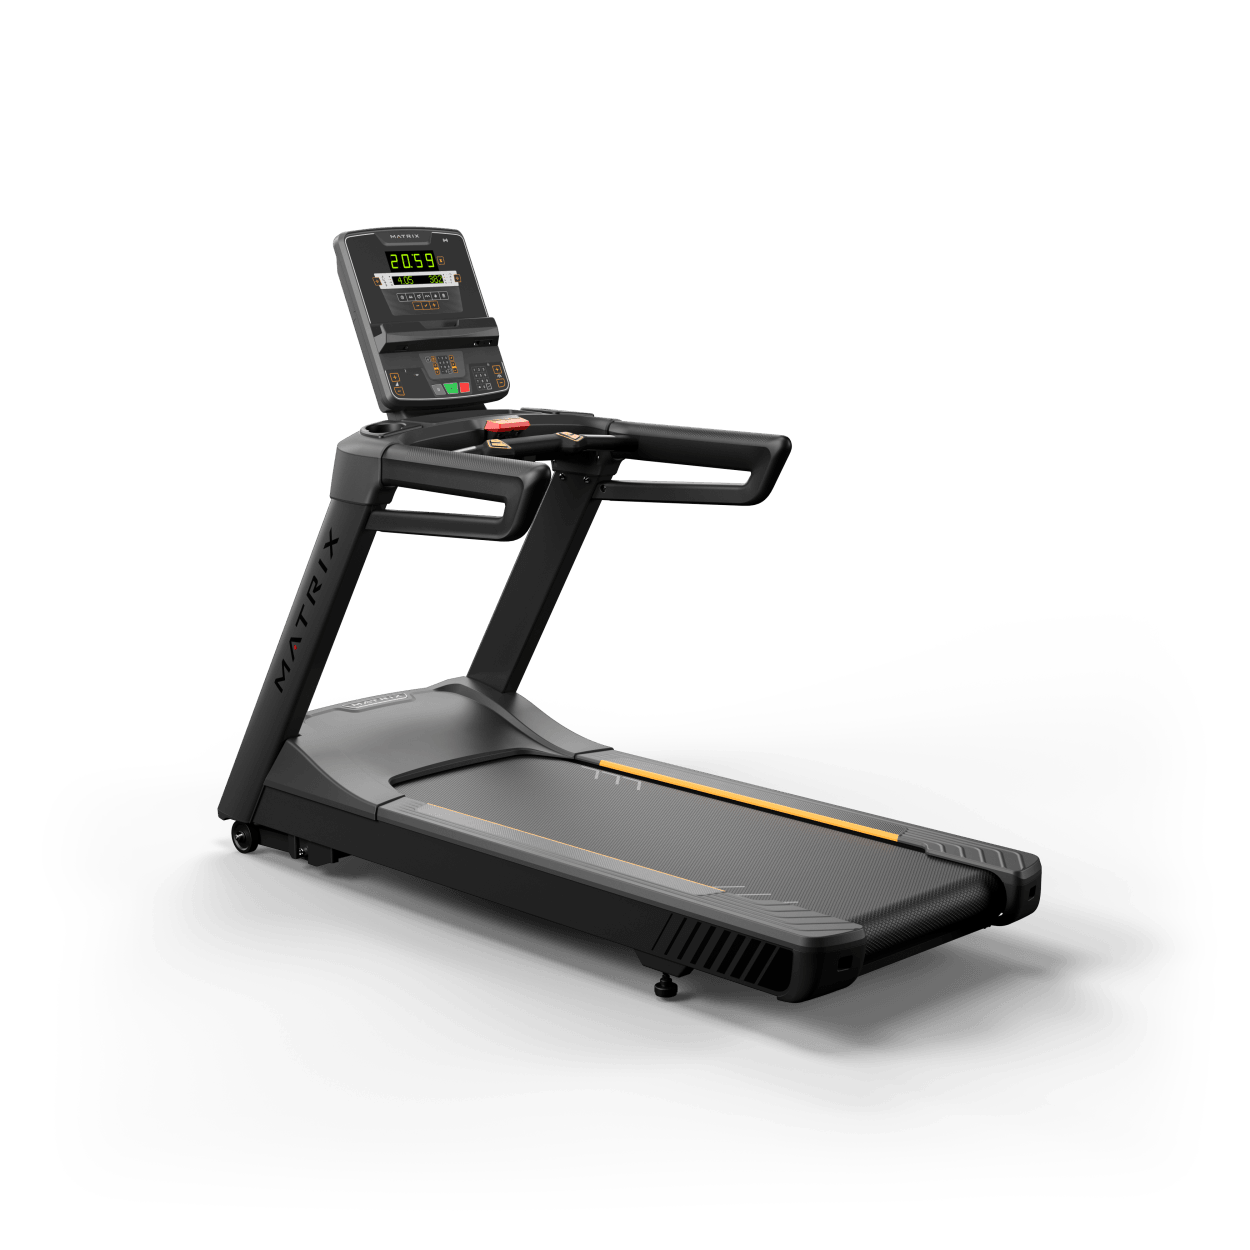 Matrix Fitness Endurance Treadmill with LED Console full view | Fitness Experience